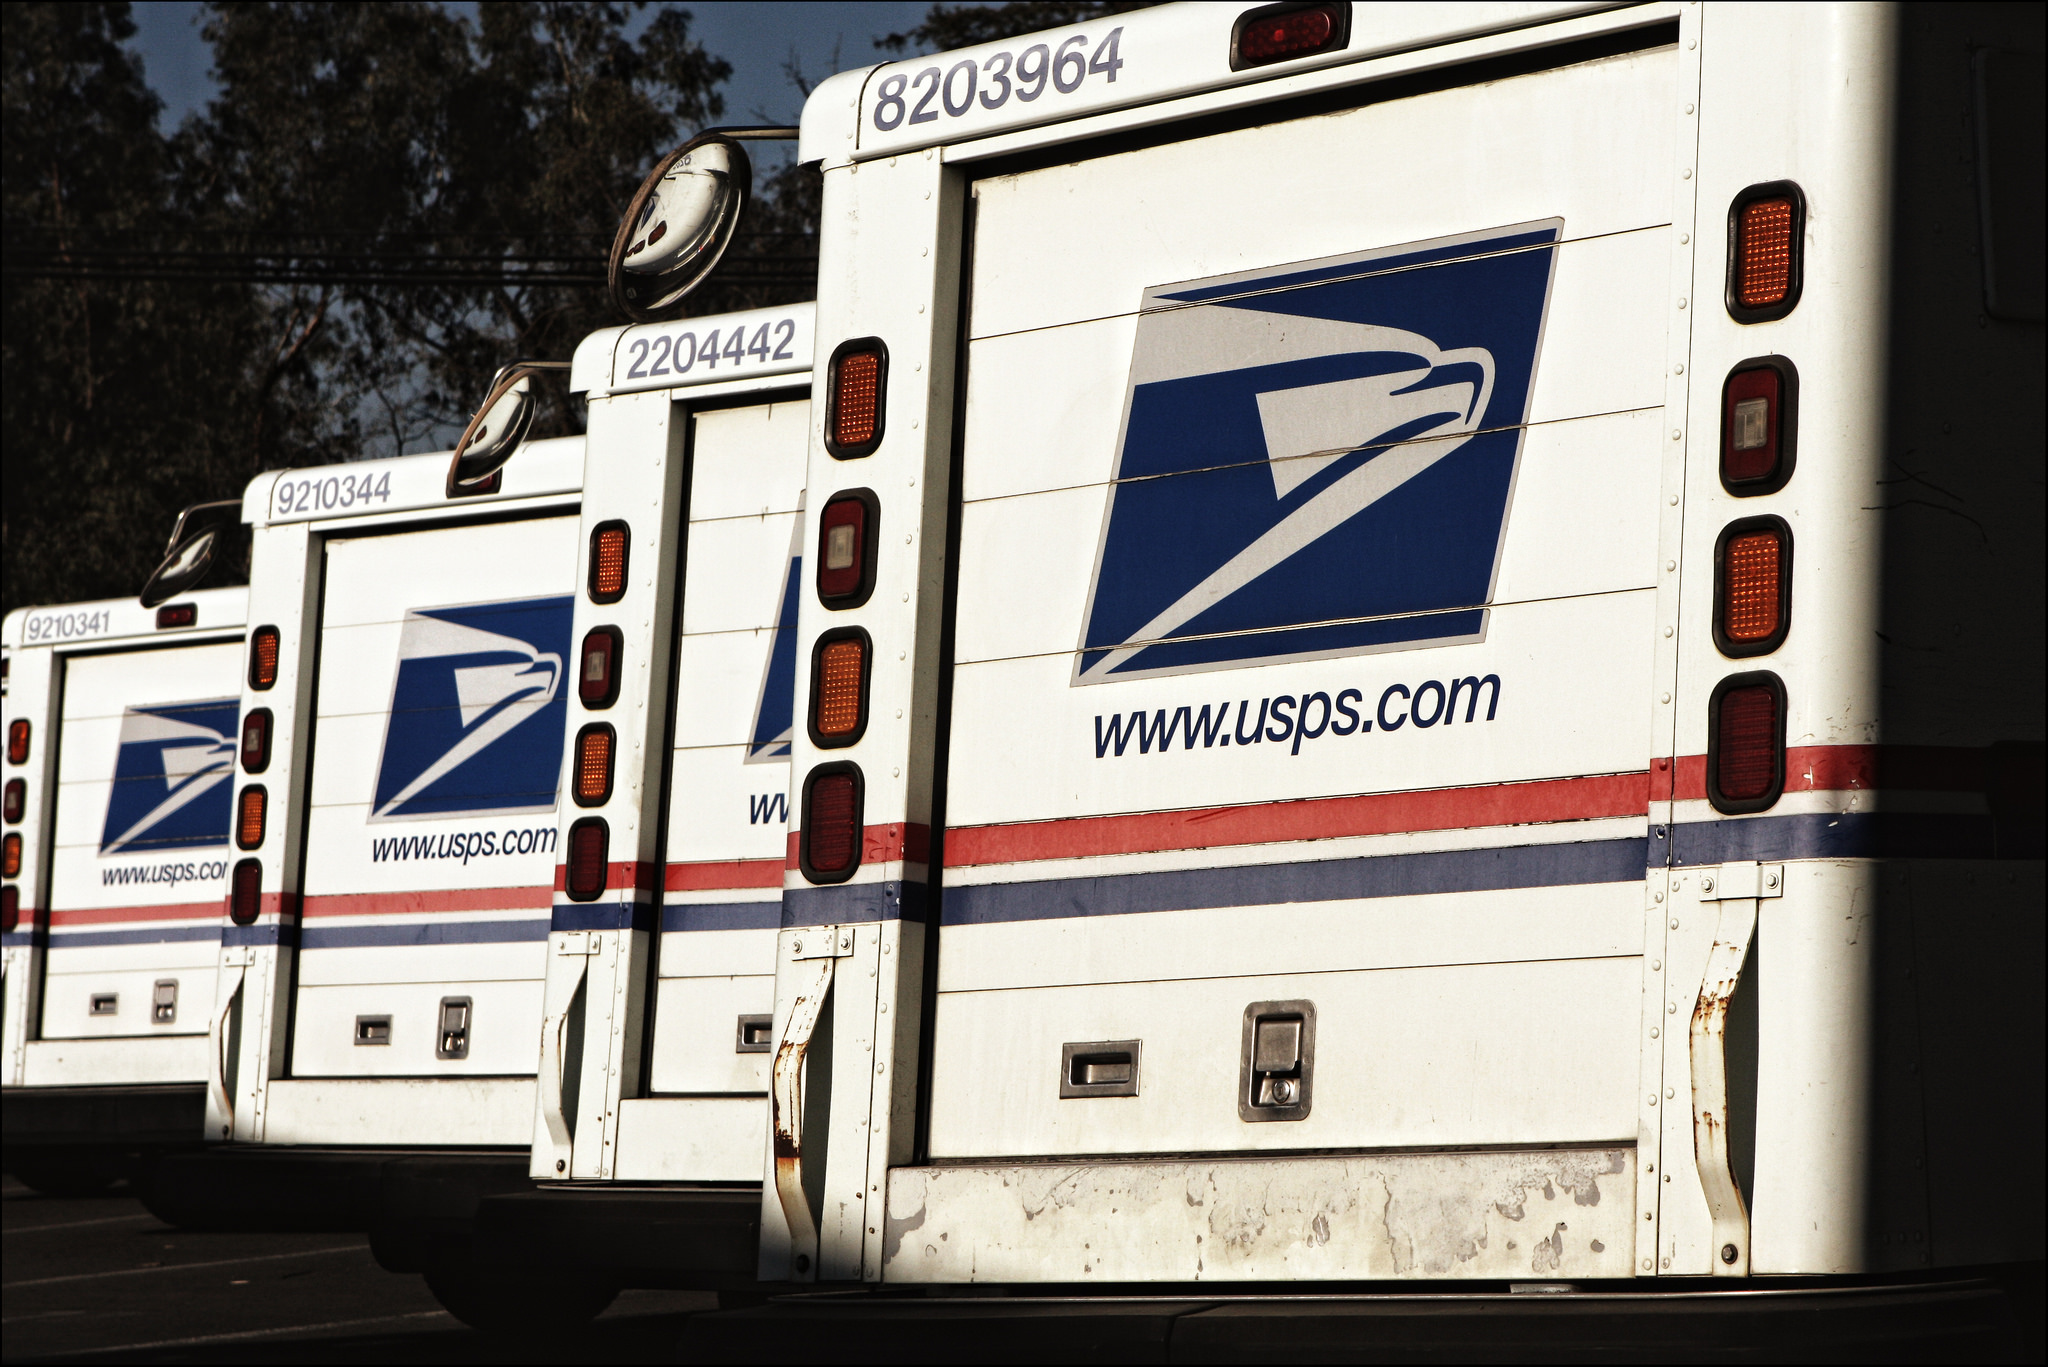 The U.S. Postal Service Is Open To Delivering Anything To Raise Cash